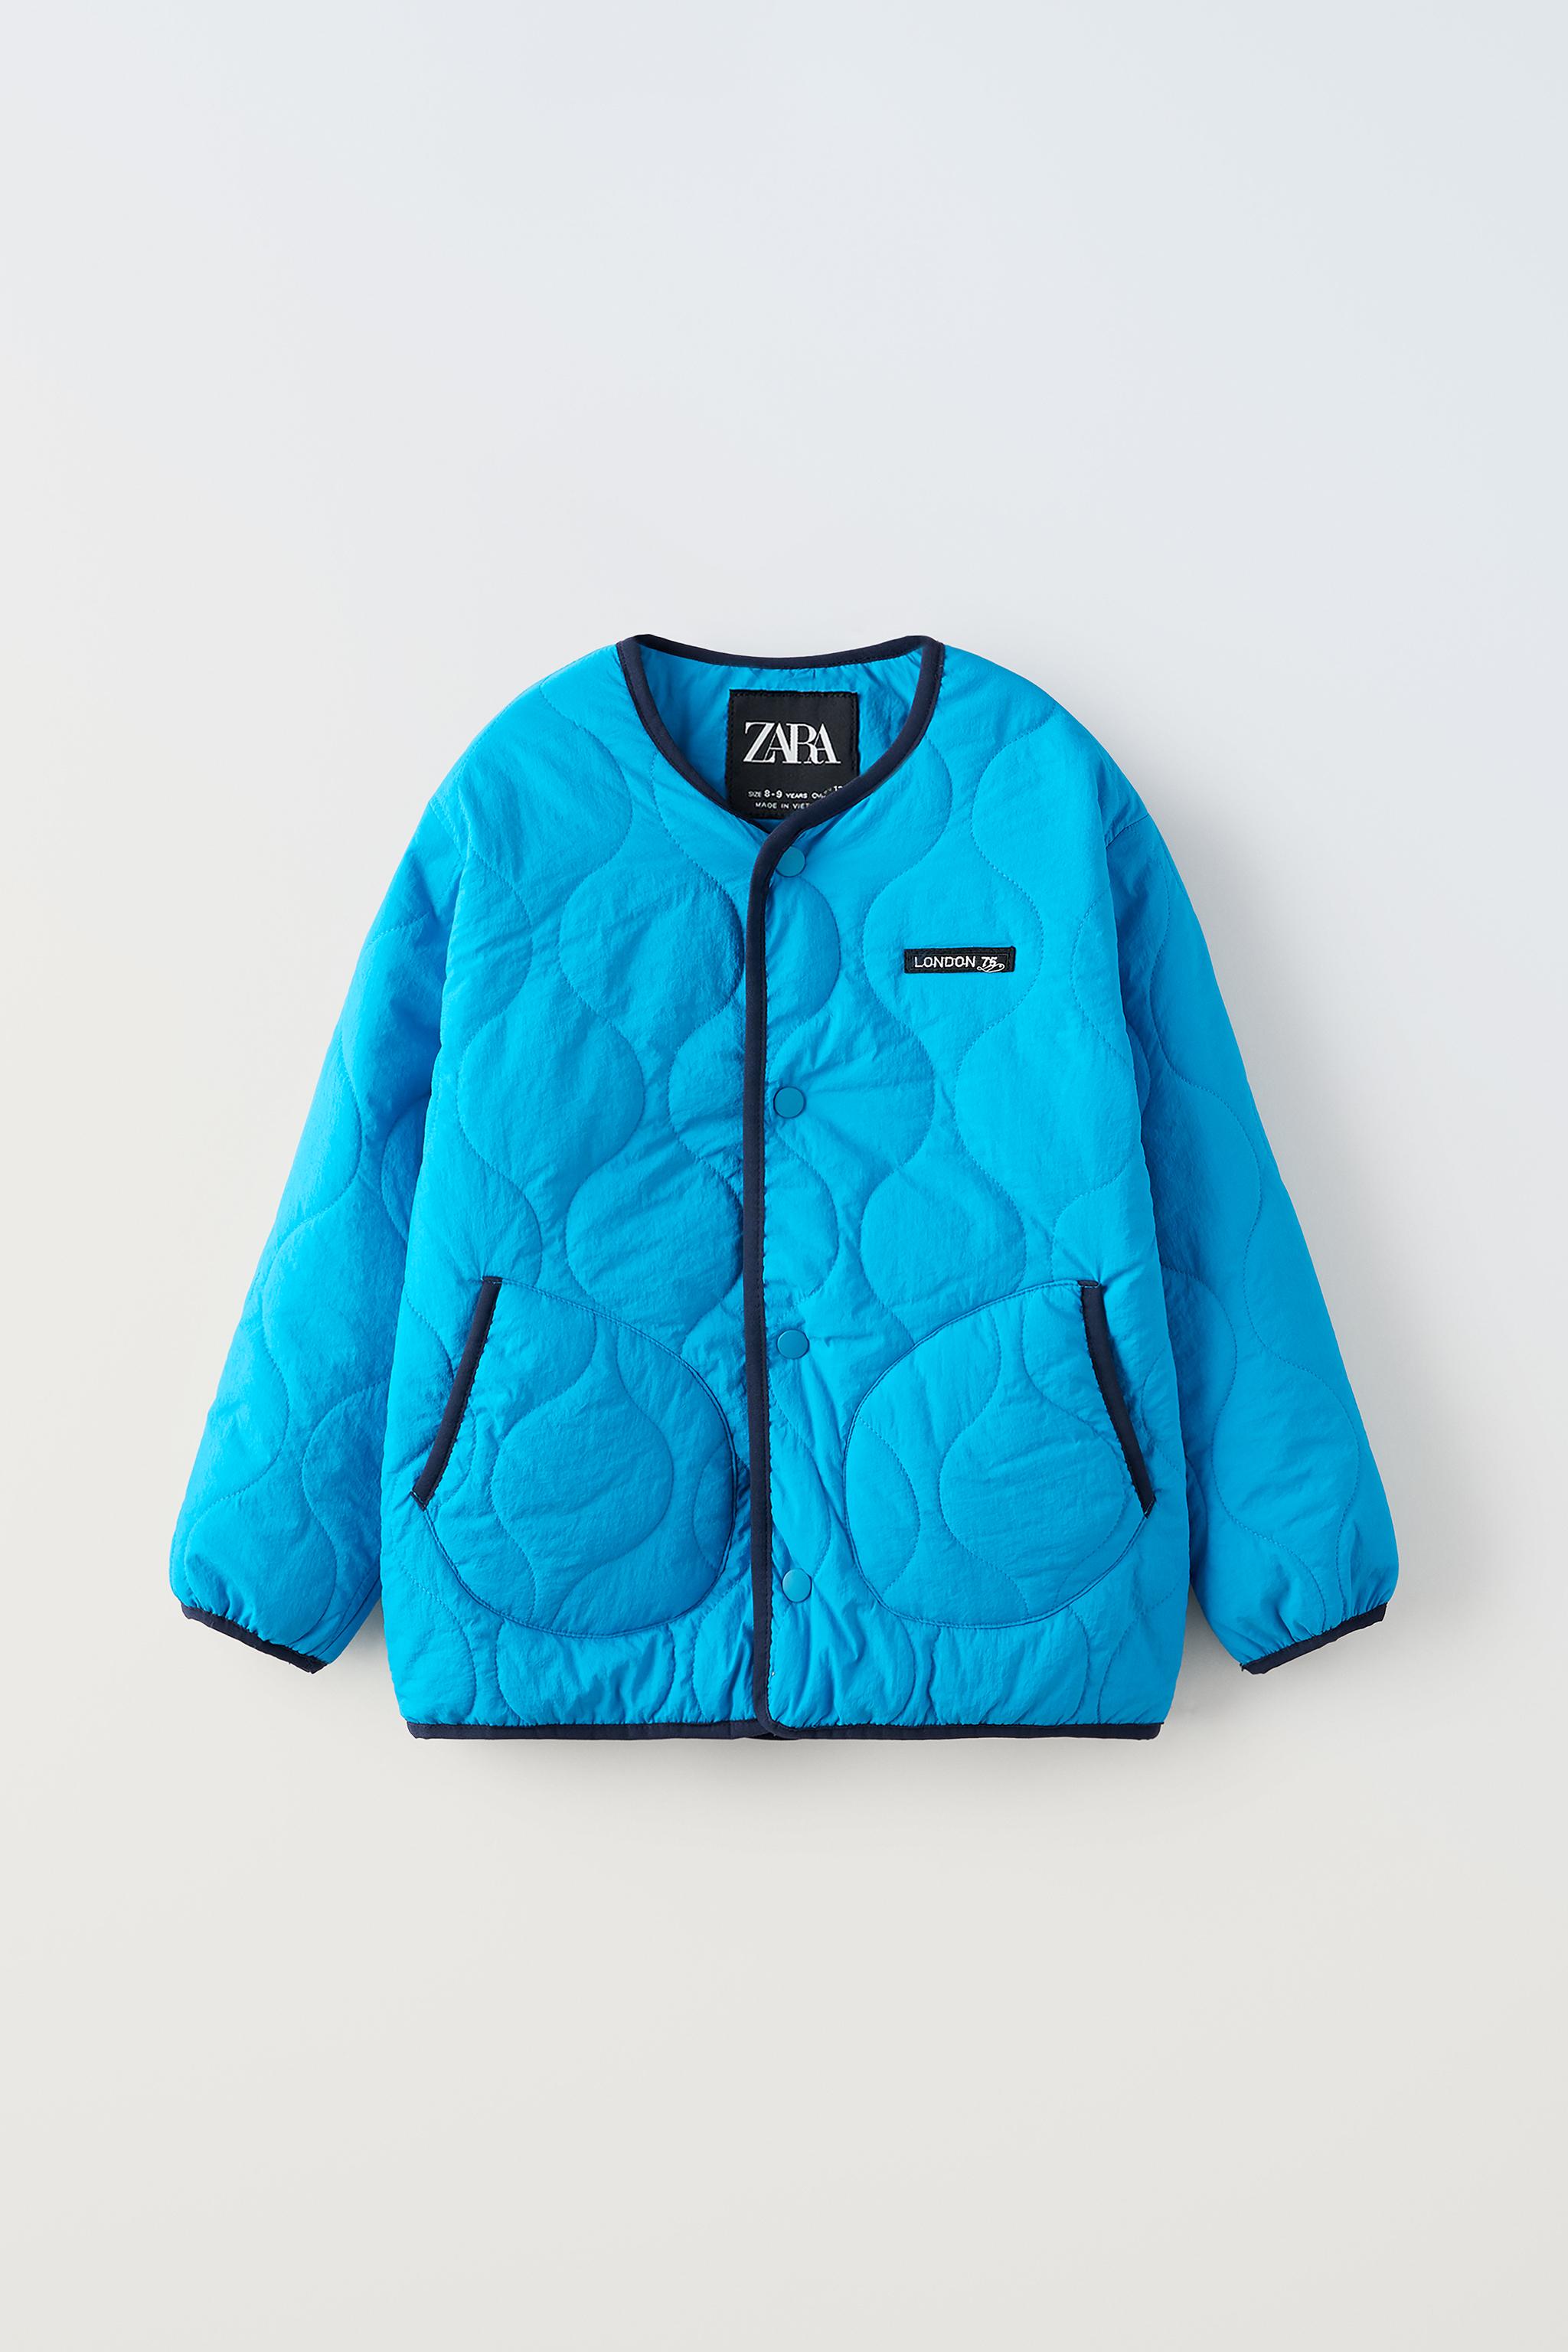 Boys' Puffer Jackets, Explore our New Arrivals